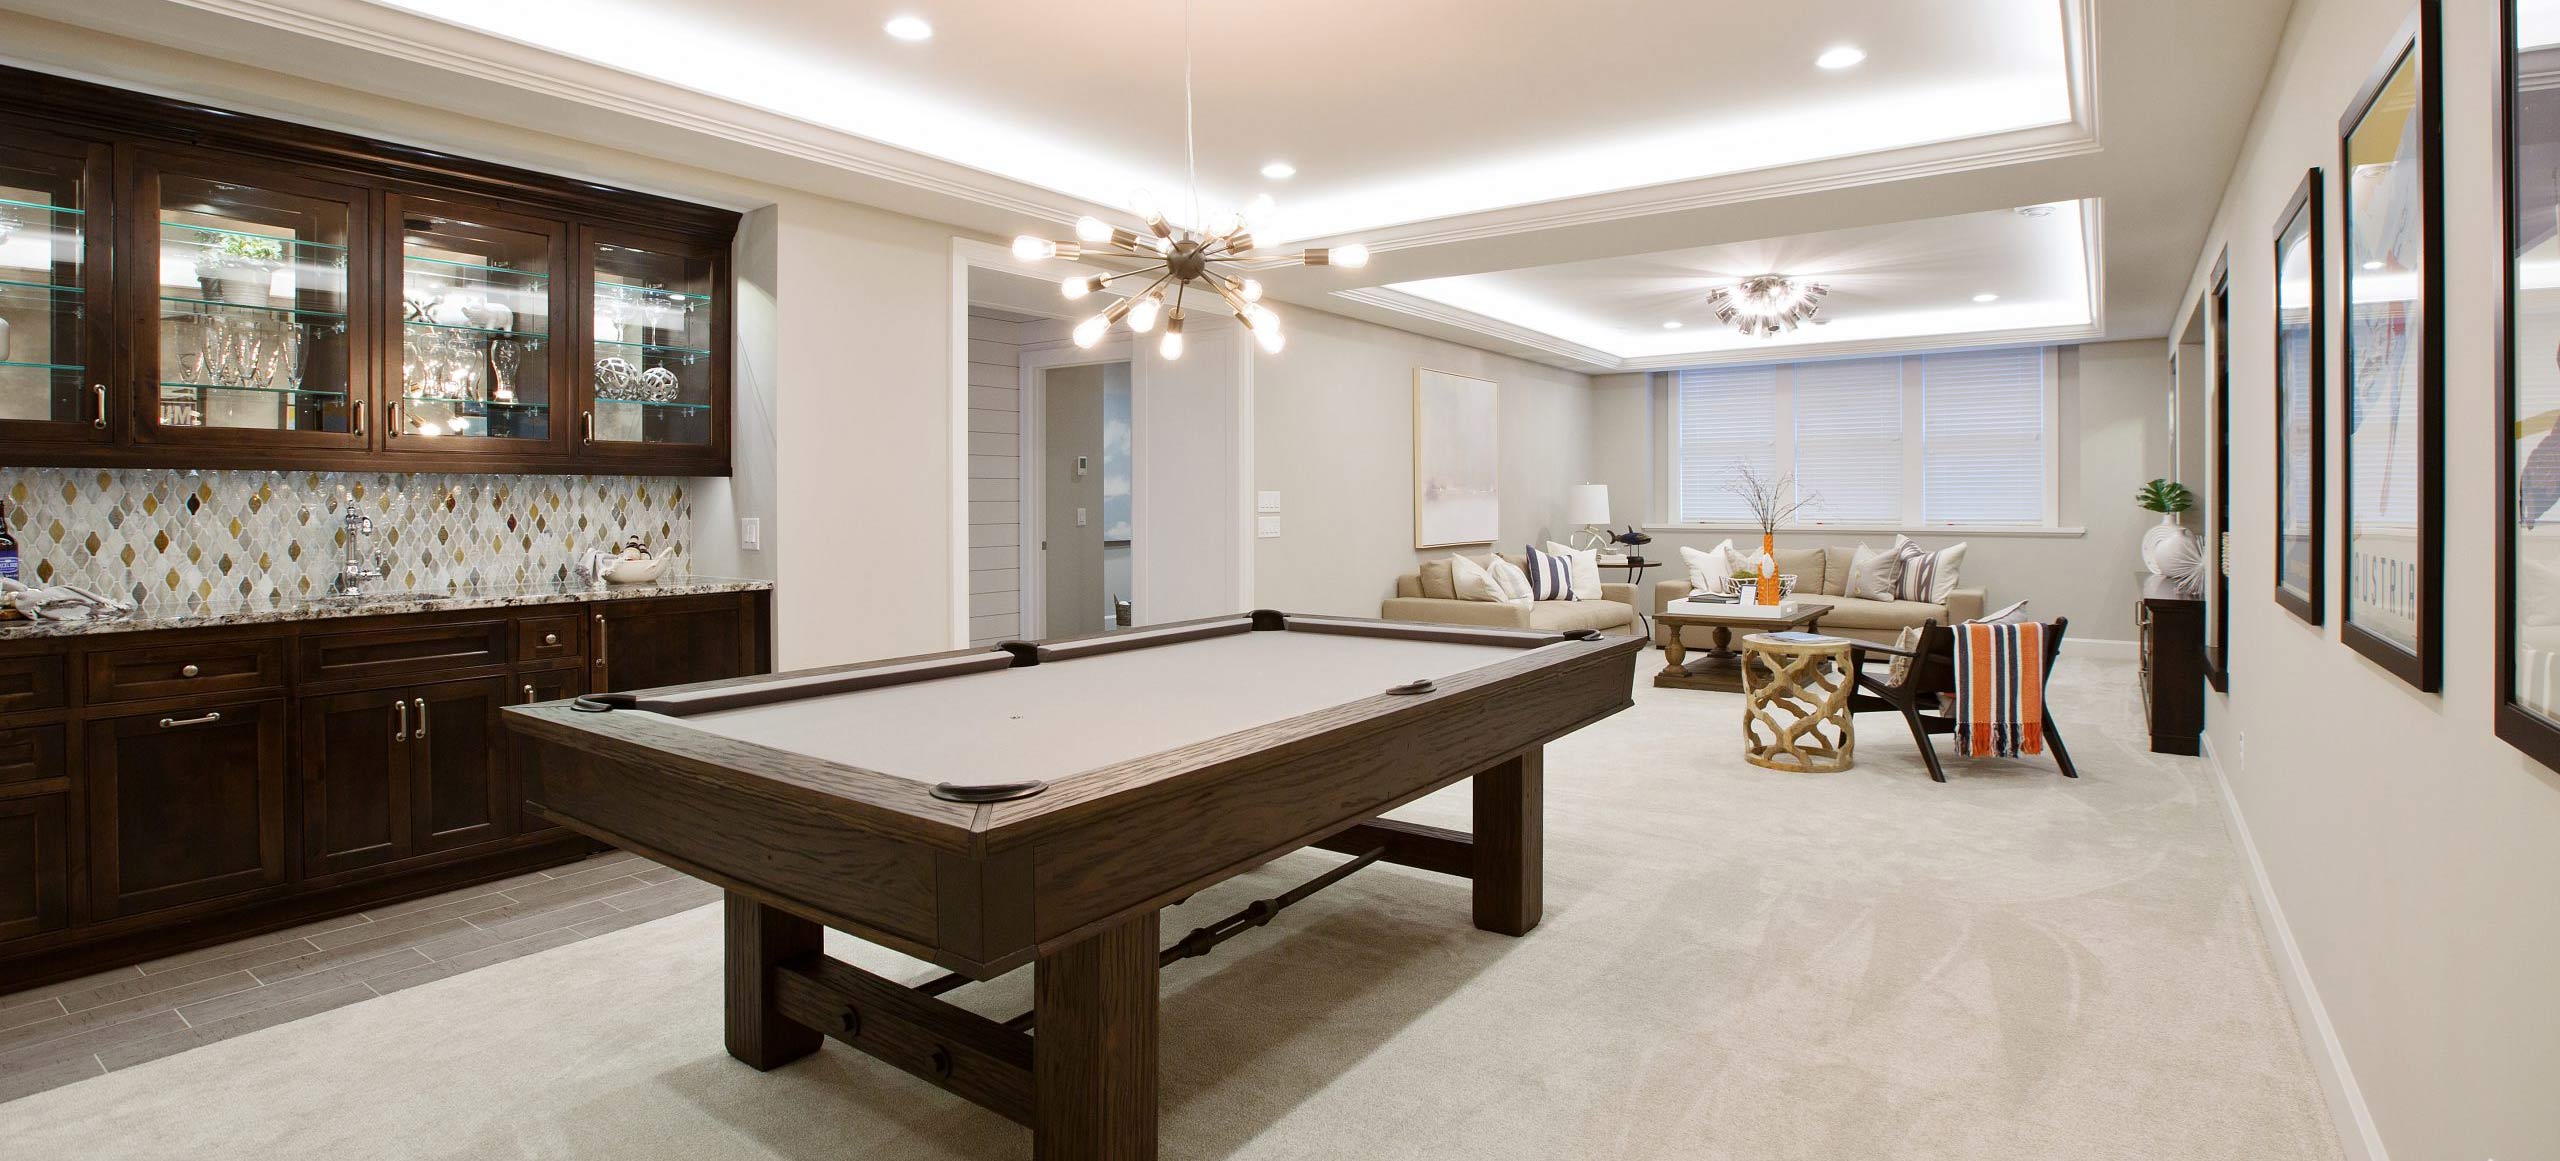 Basement convsersion into a games room